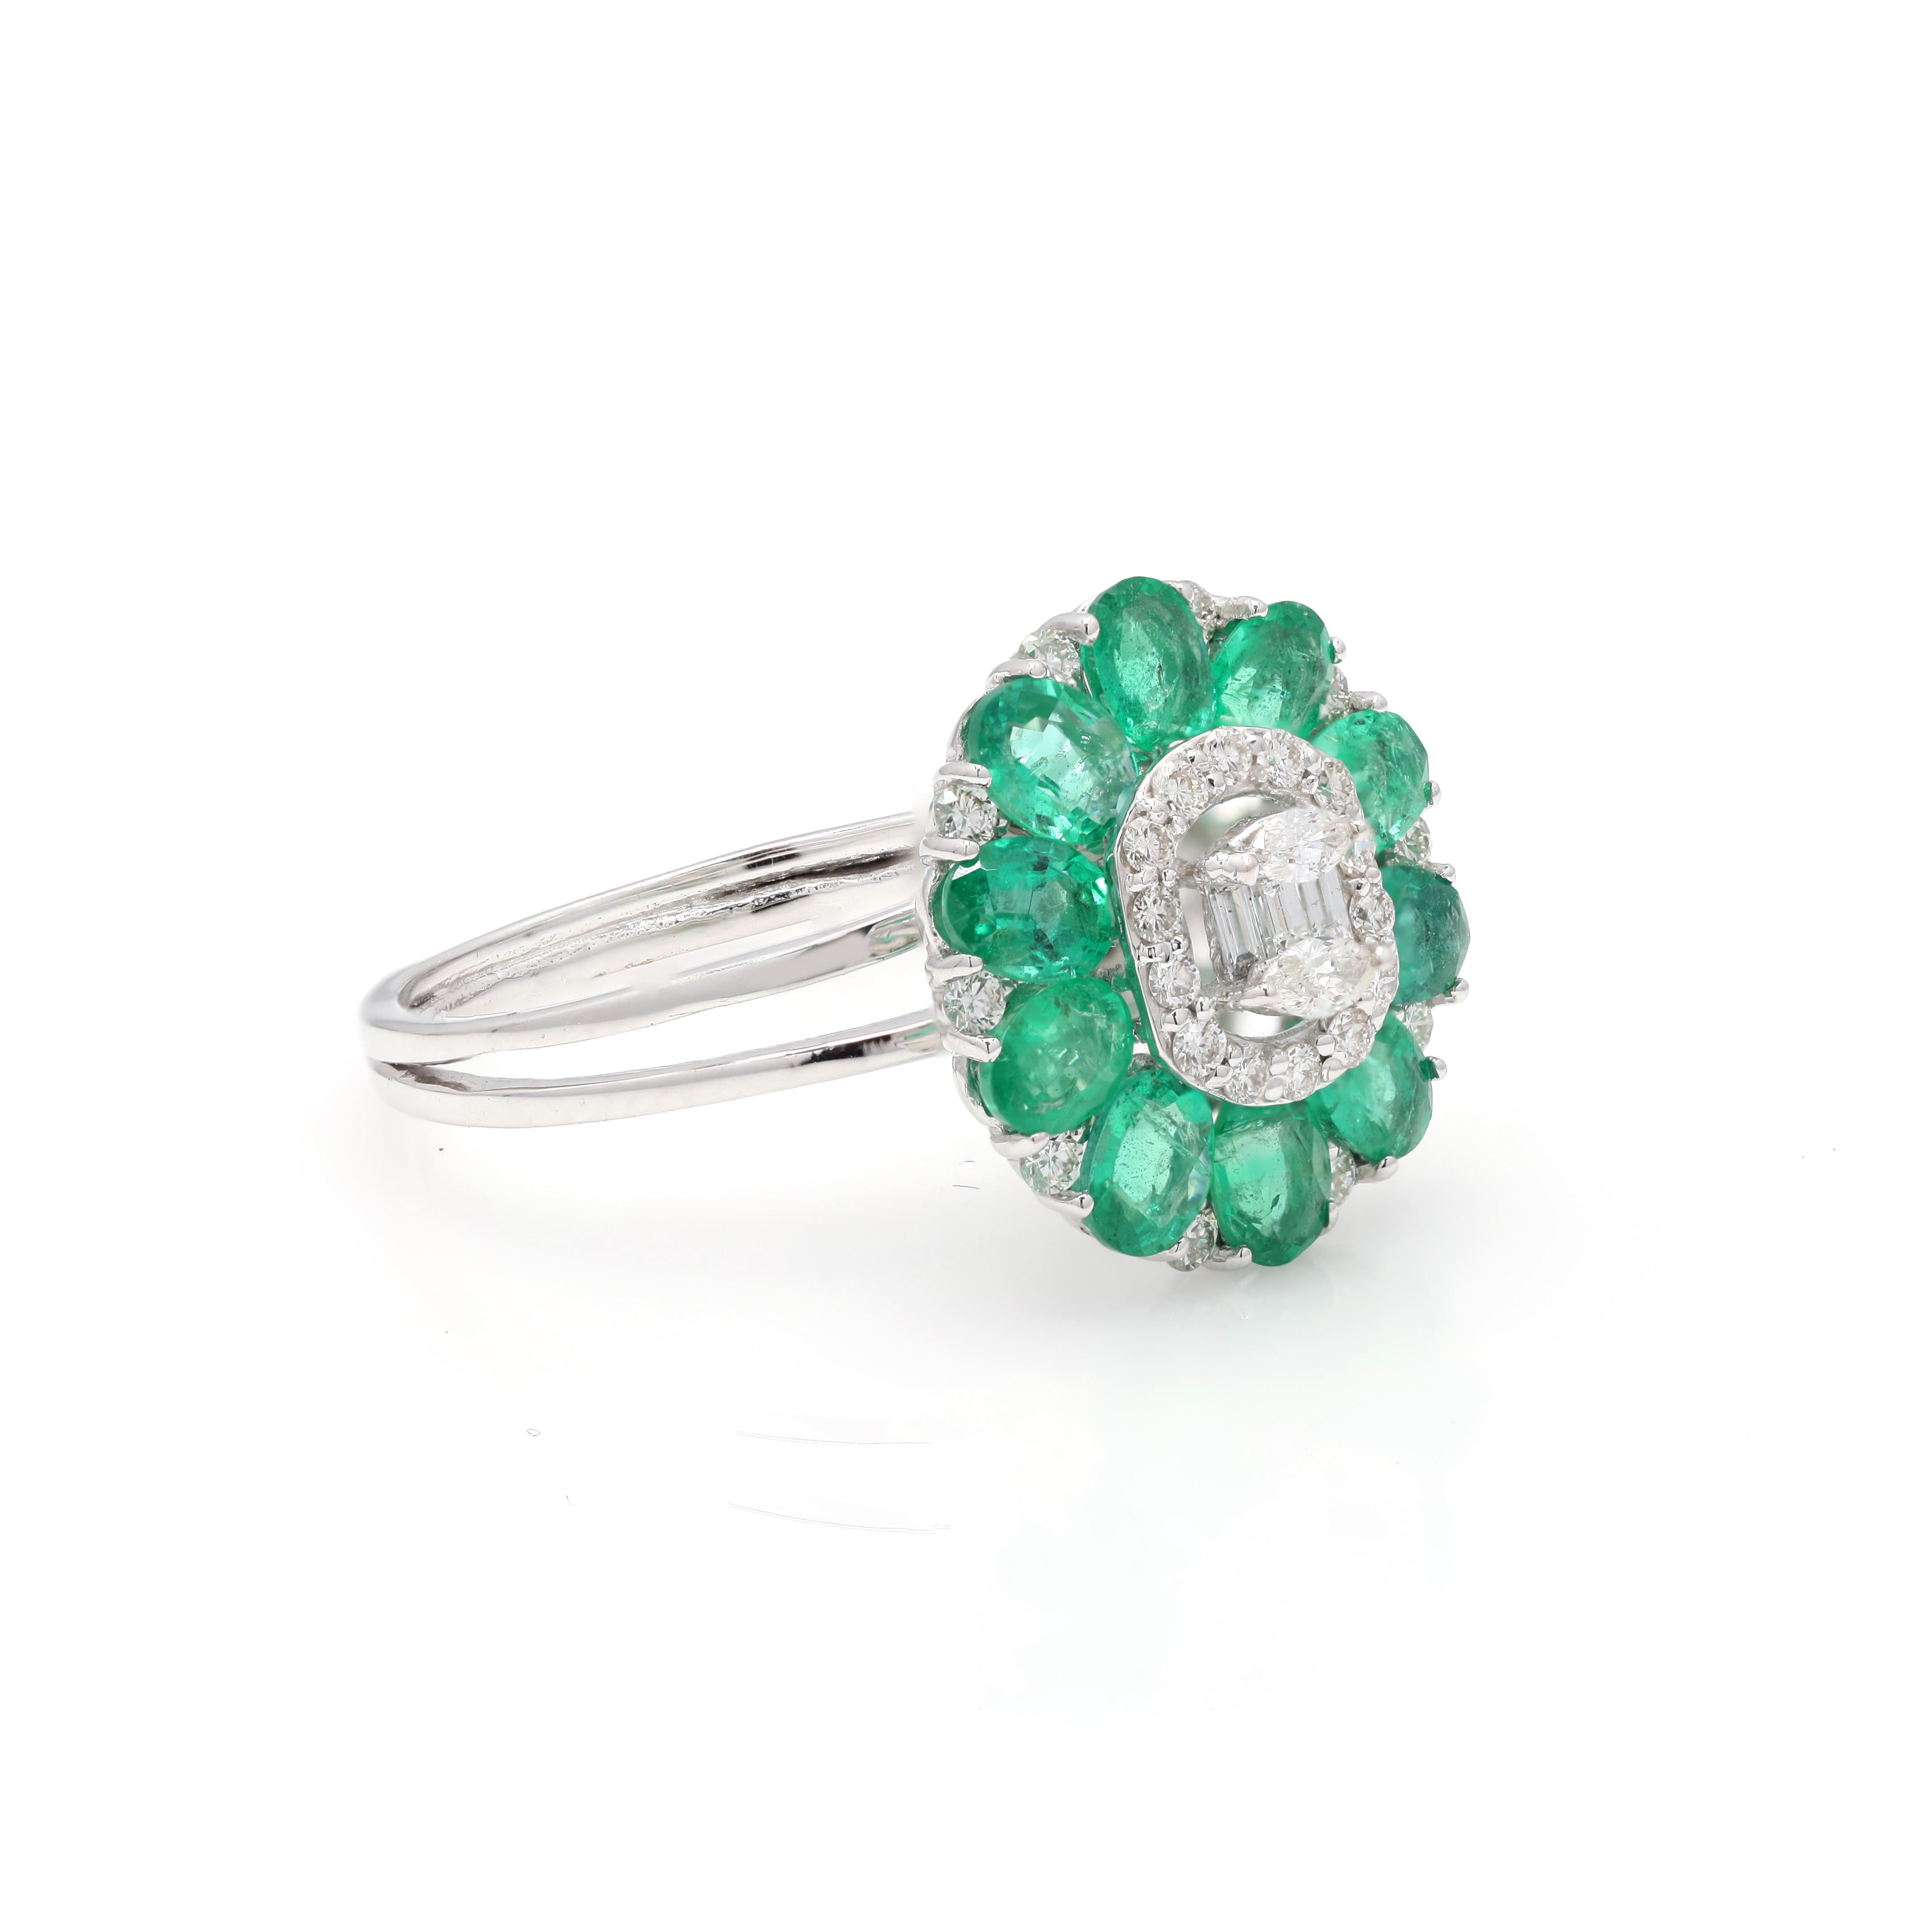 For Sale:  Fascinating Solid 18k White Gold Diamond and Emerald Statement Flower Ring 4